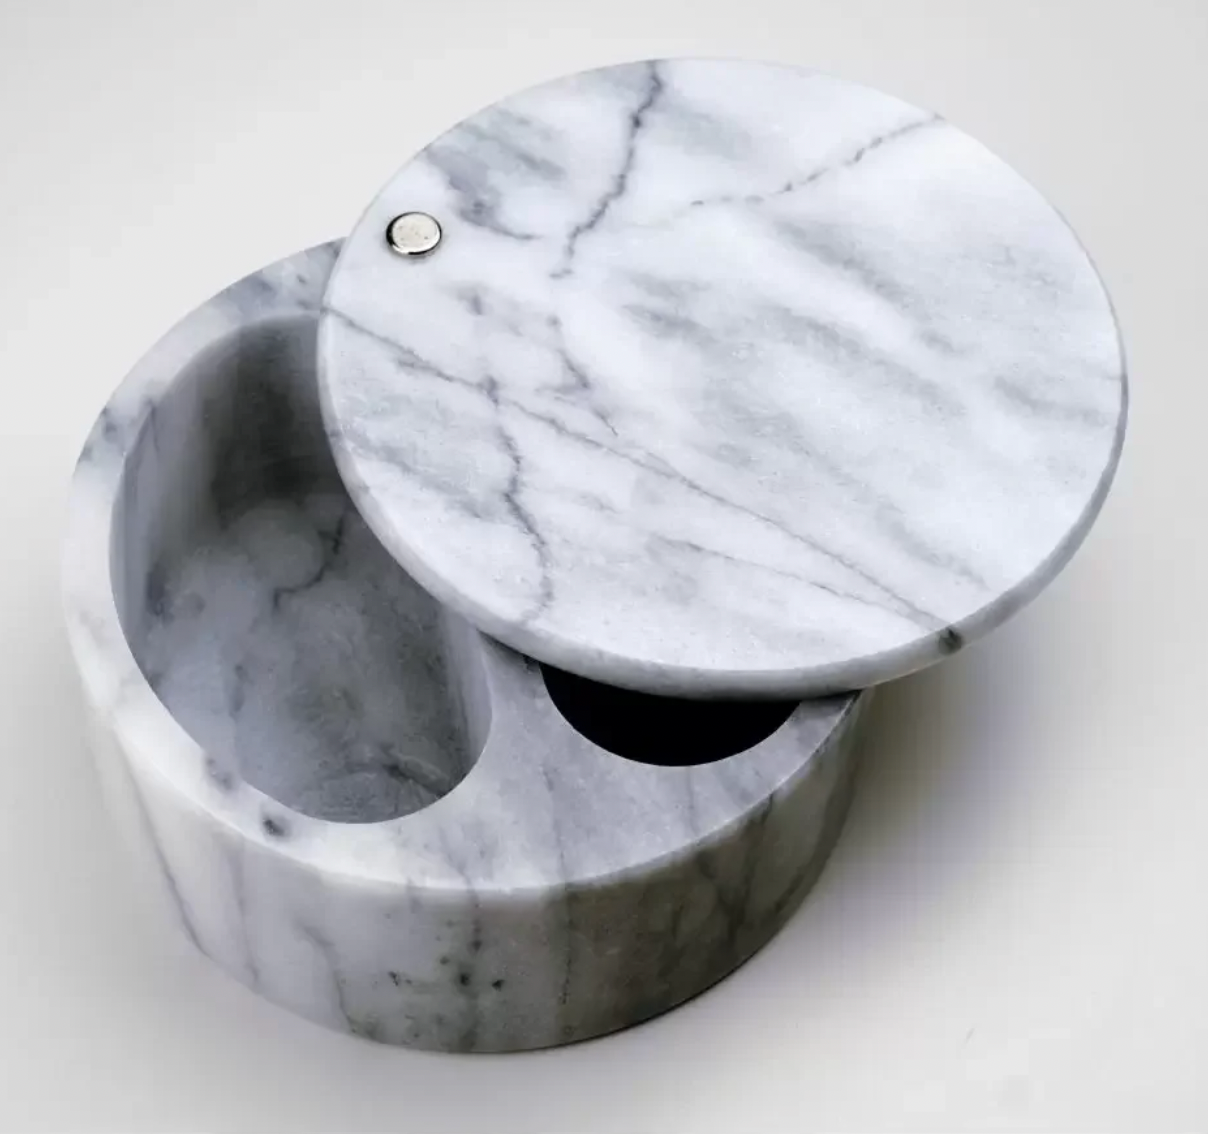 Salt Box with Swivel Top - White Marble